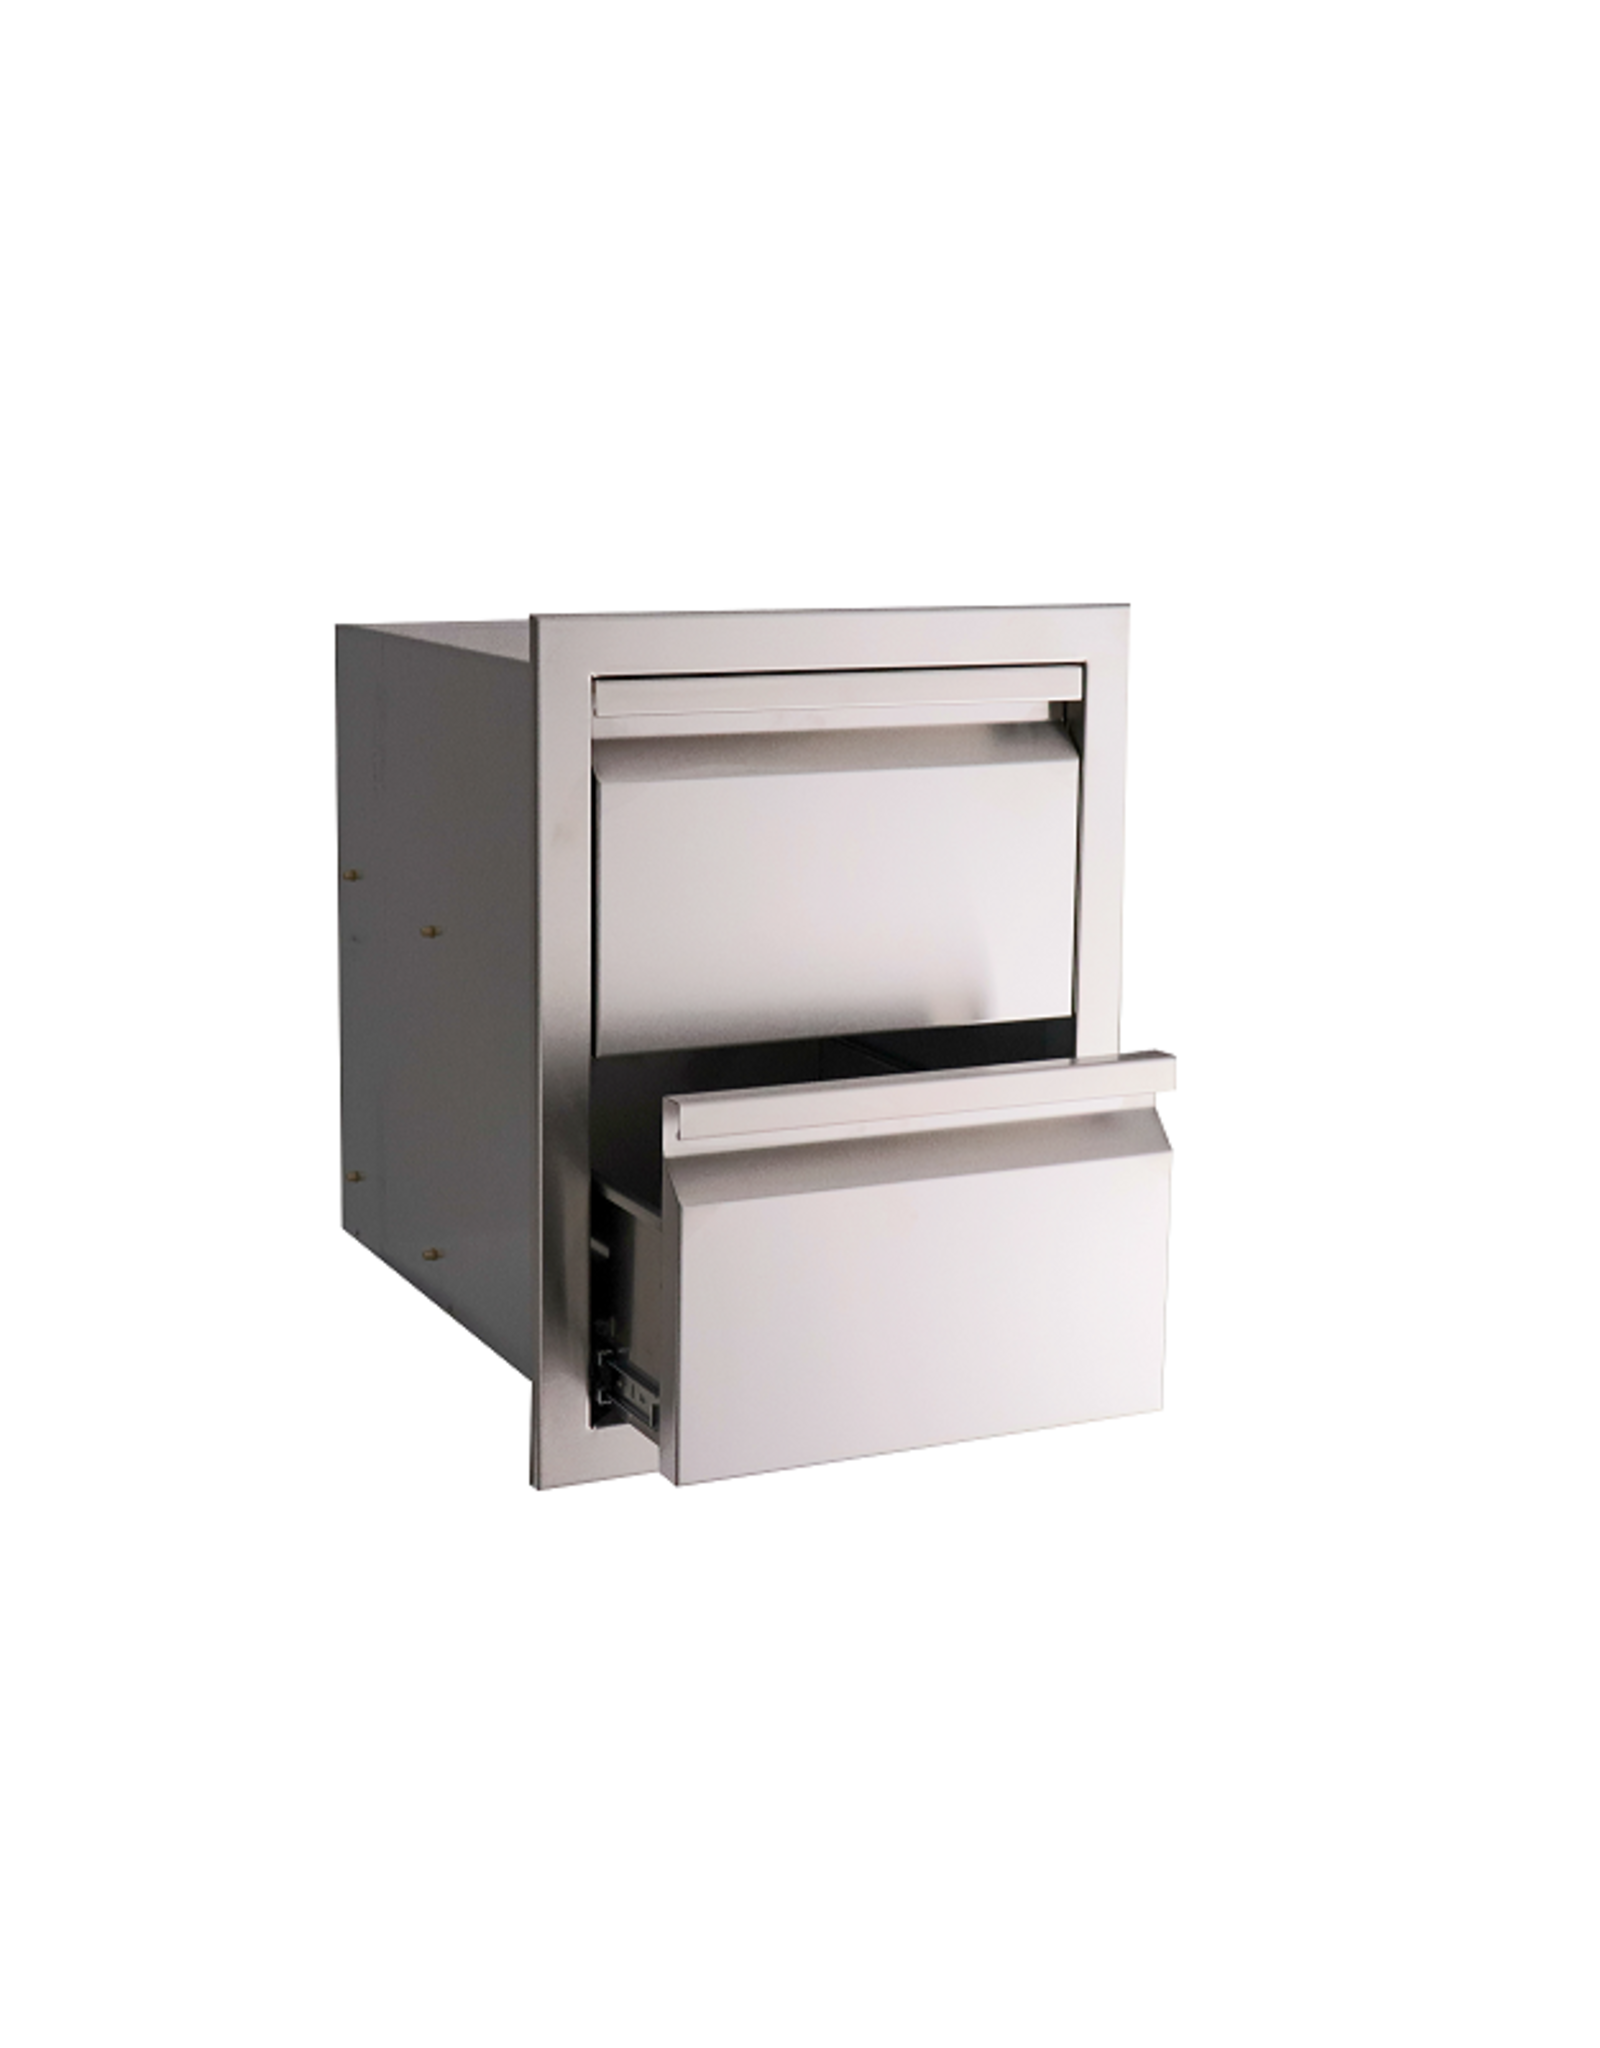 Renaissance Cooking Systems Renaissance Cooking Systems The Valiant Series Double Drawer - VDR1